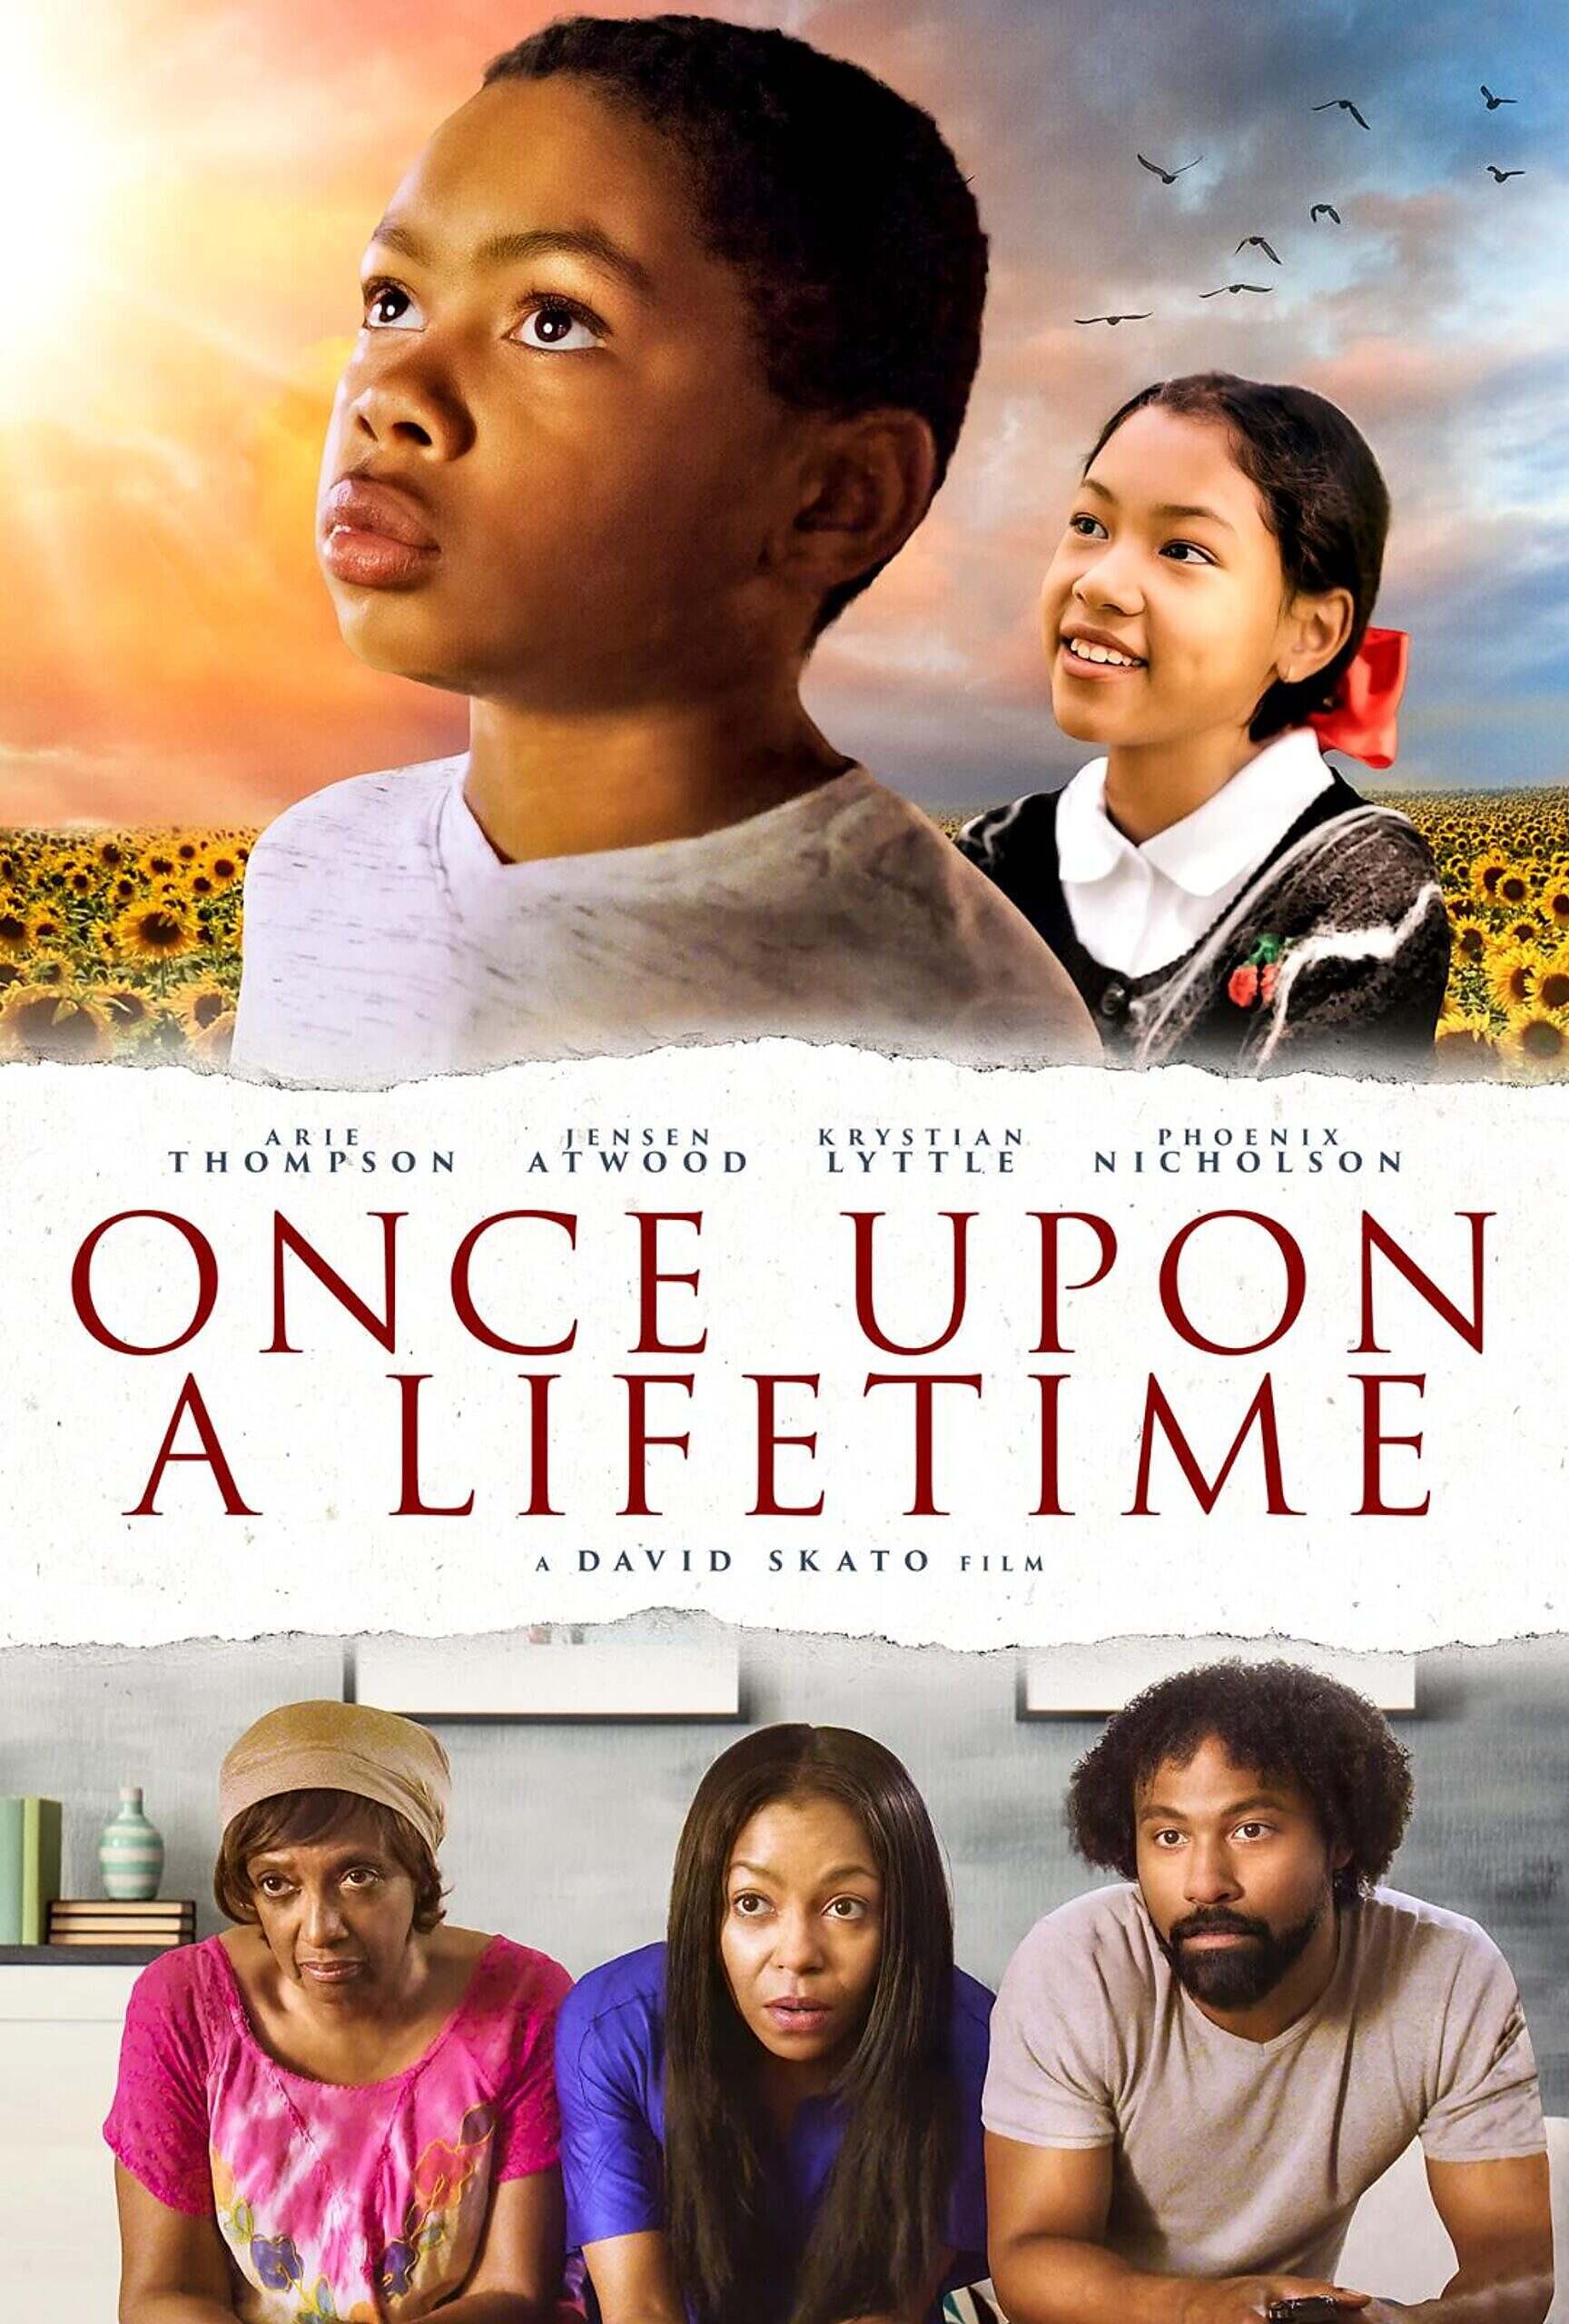 1st Trailer For 'Once Upon A Lifetime' Movie